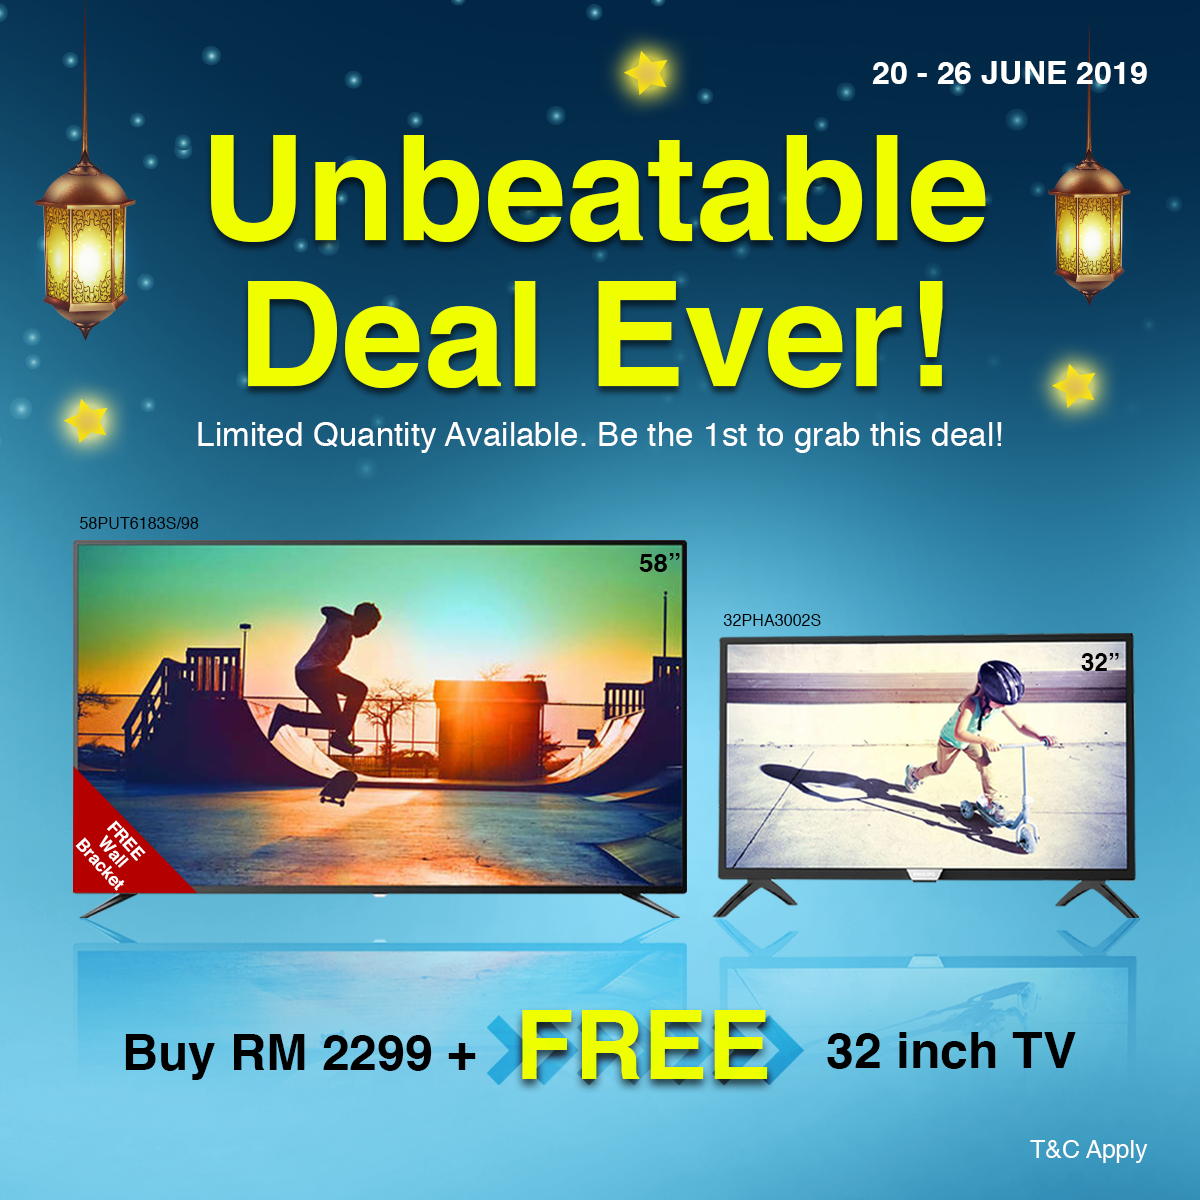 [TEST] GUYS! We Found This Insane Promo Offering a FREE 32IN LED TV & More, Here’s What You NEED to Know - WORLD OF BUZZ